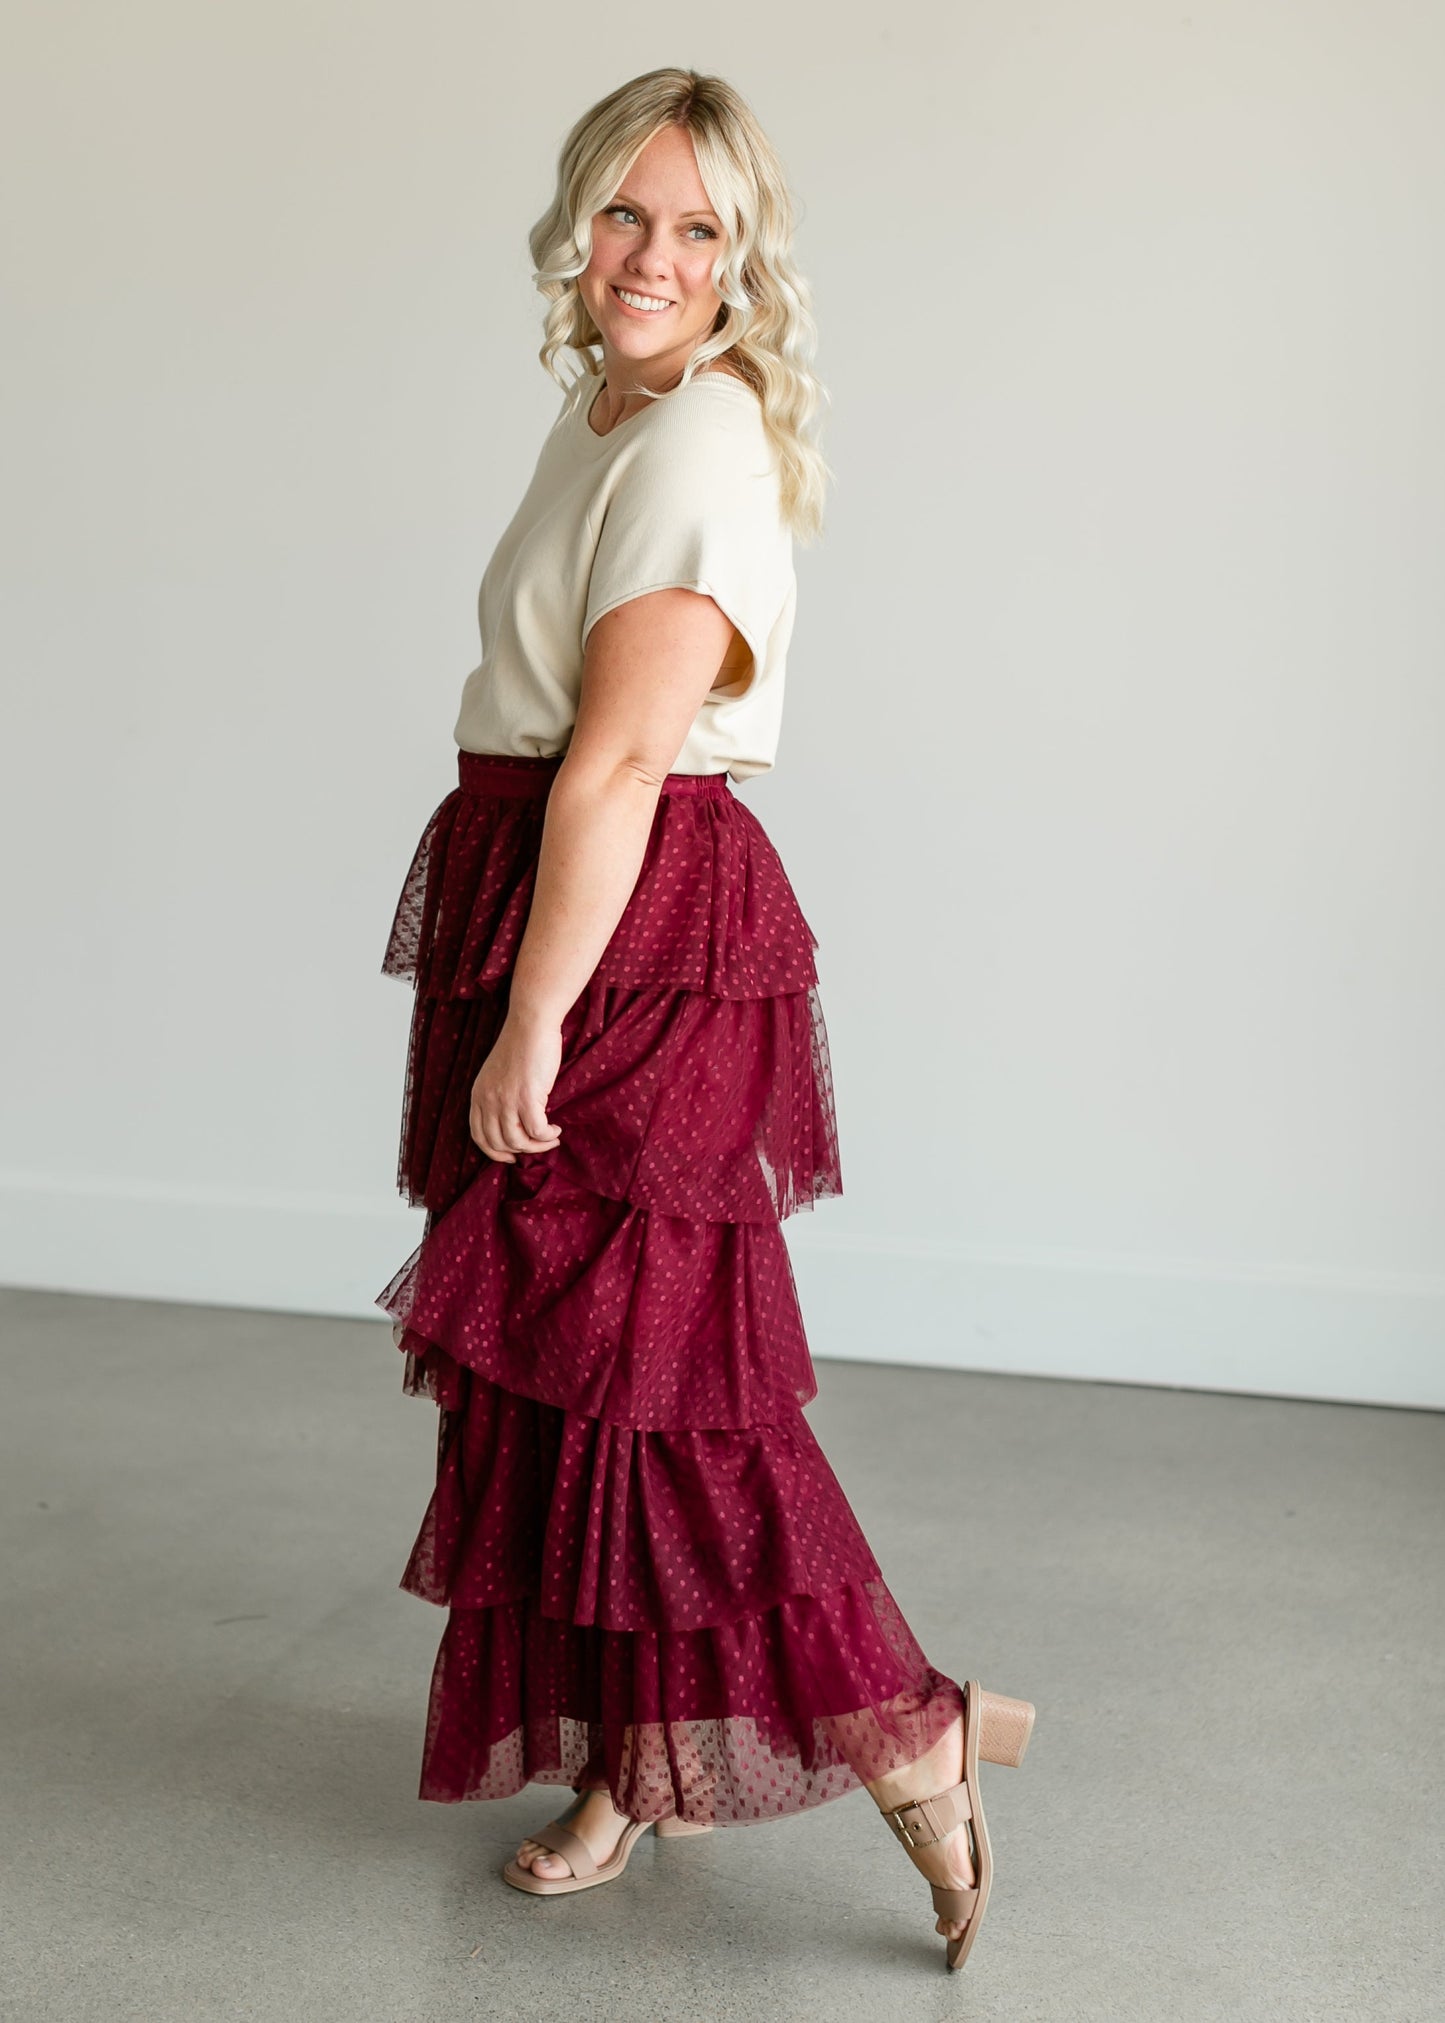 Tiered Tulle Maxi Skirt FF Skirts